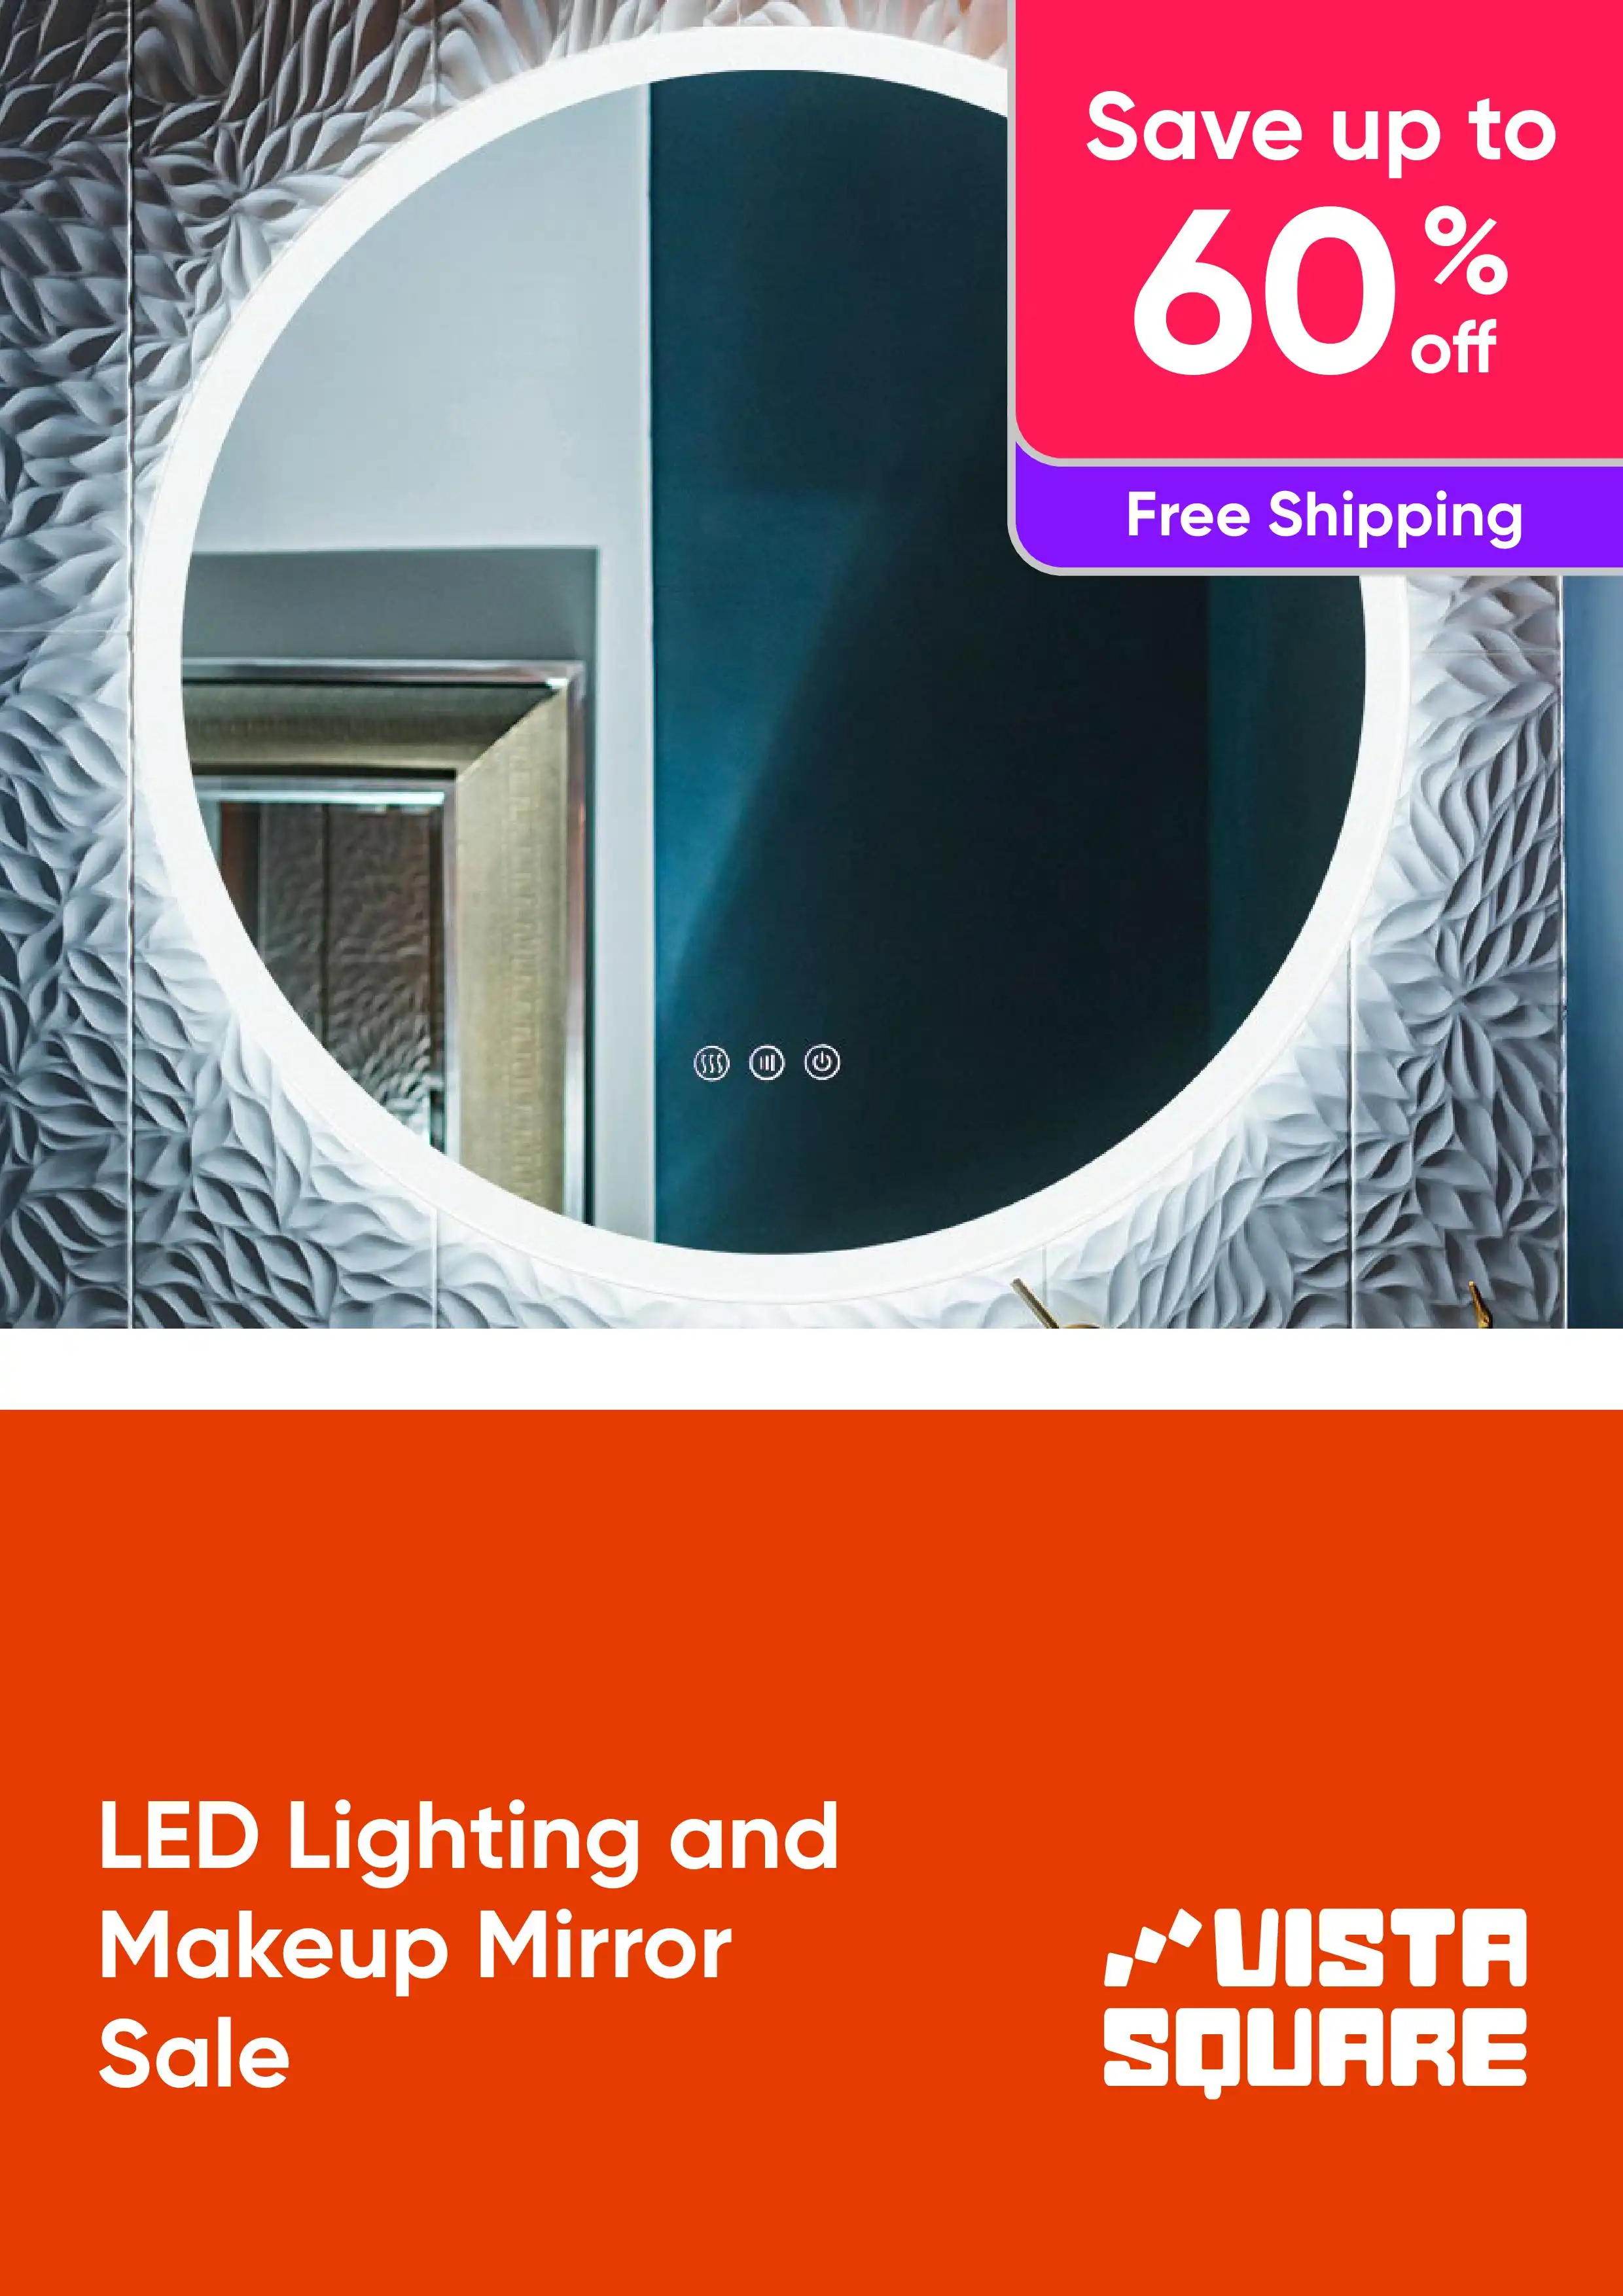 LED Lighting and Makeup Mirror Sale - up to 60% off